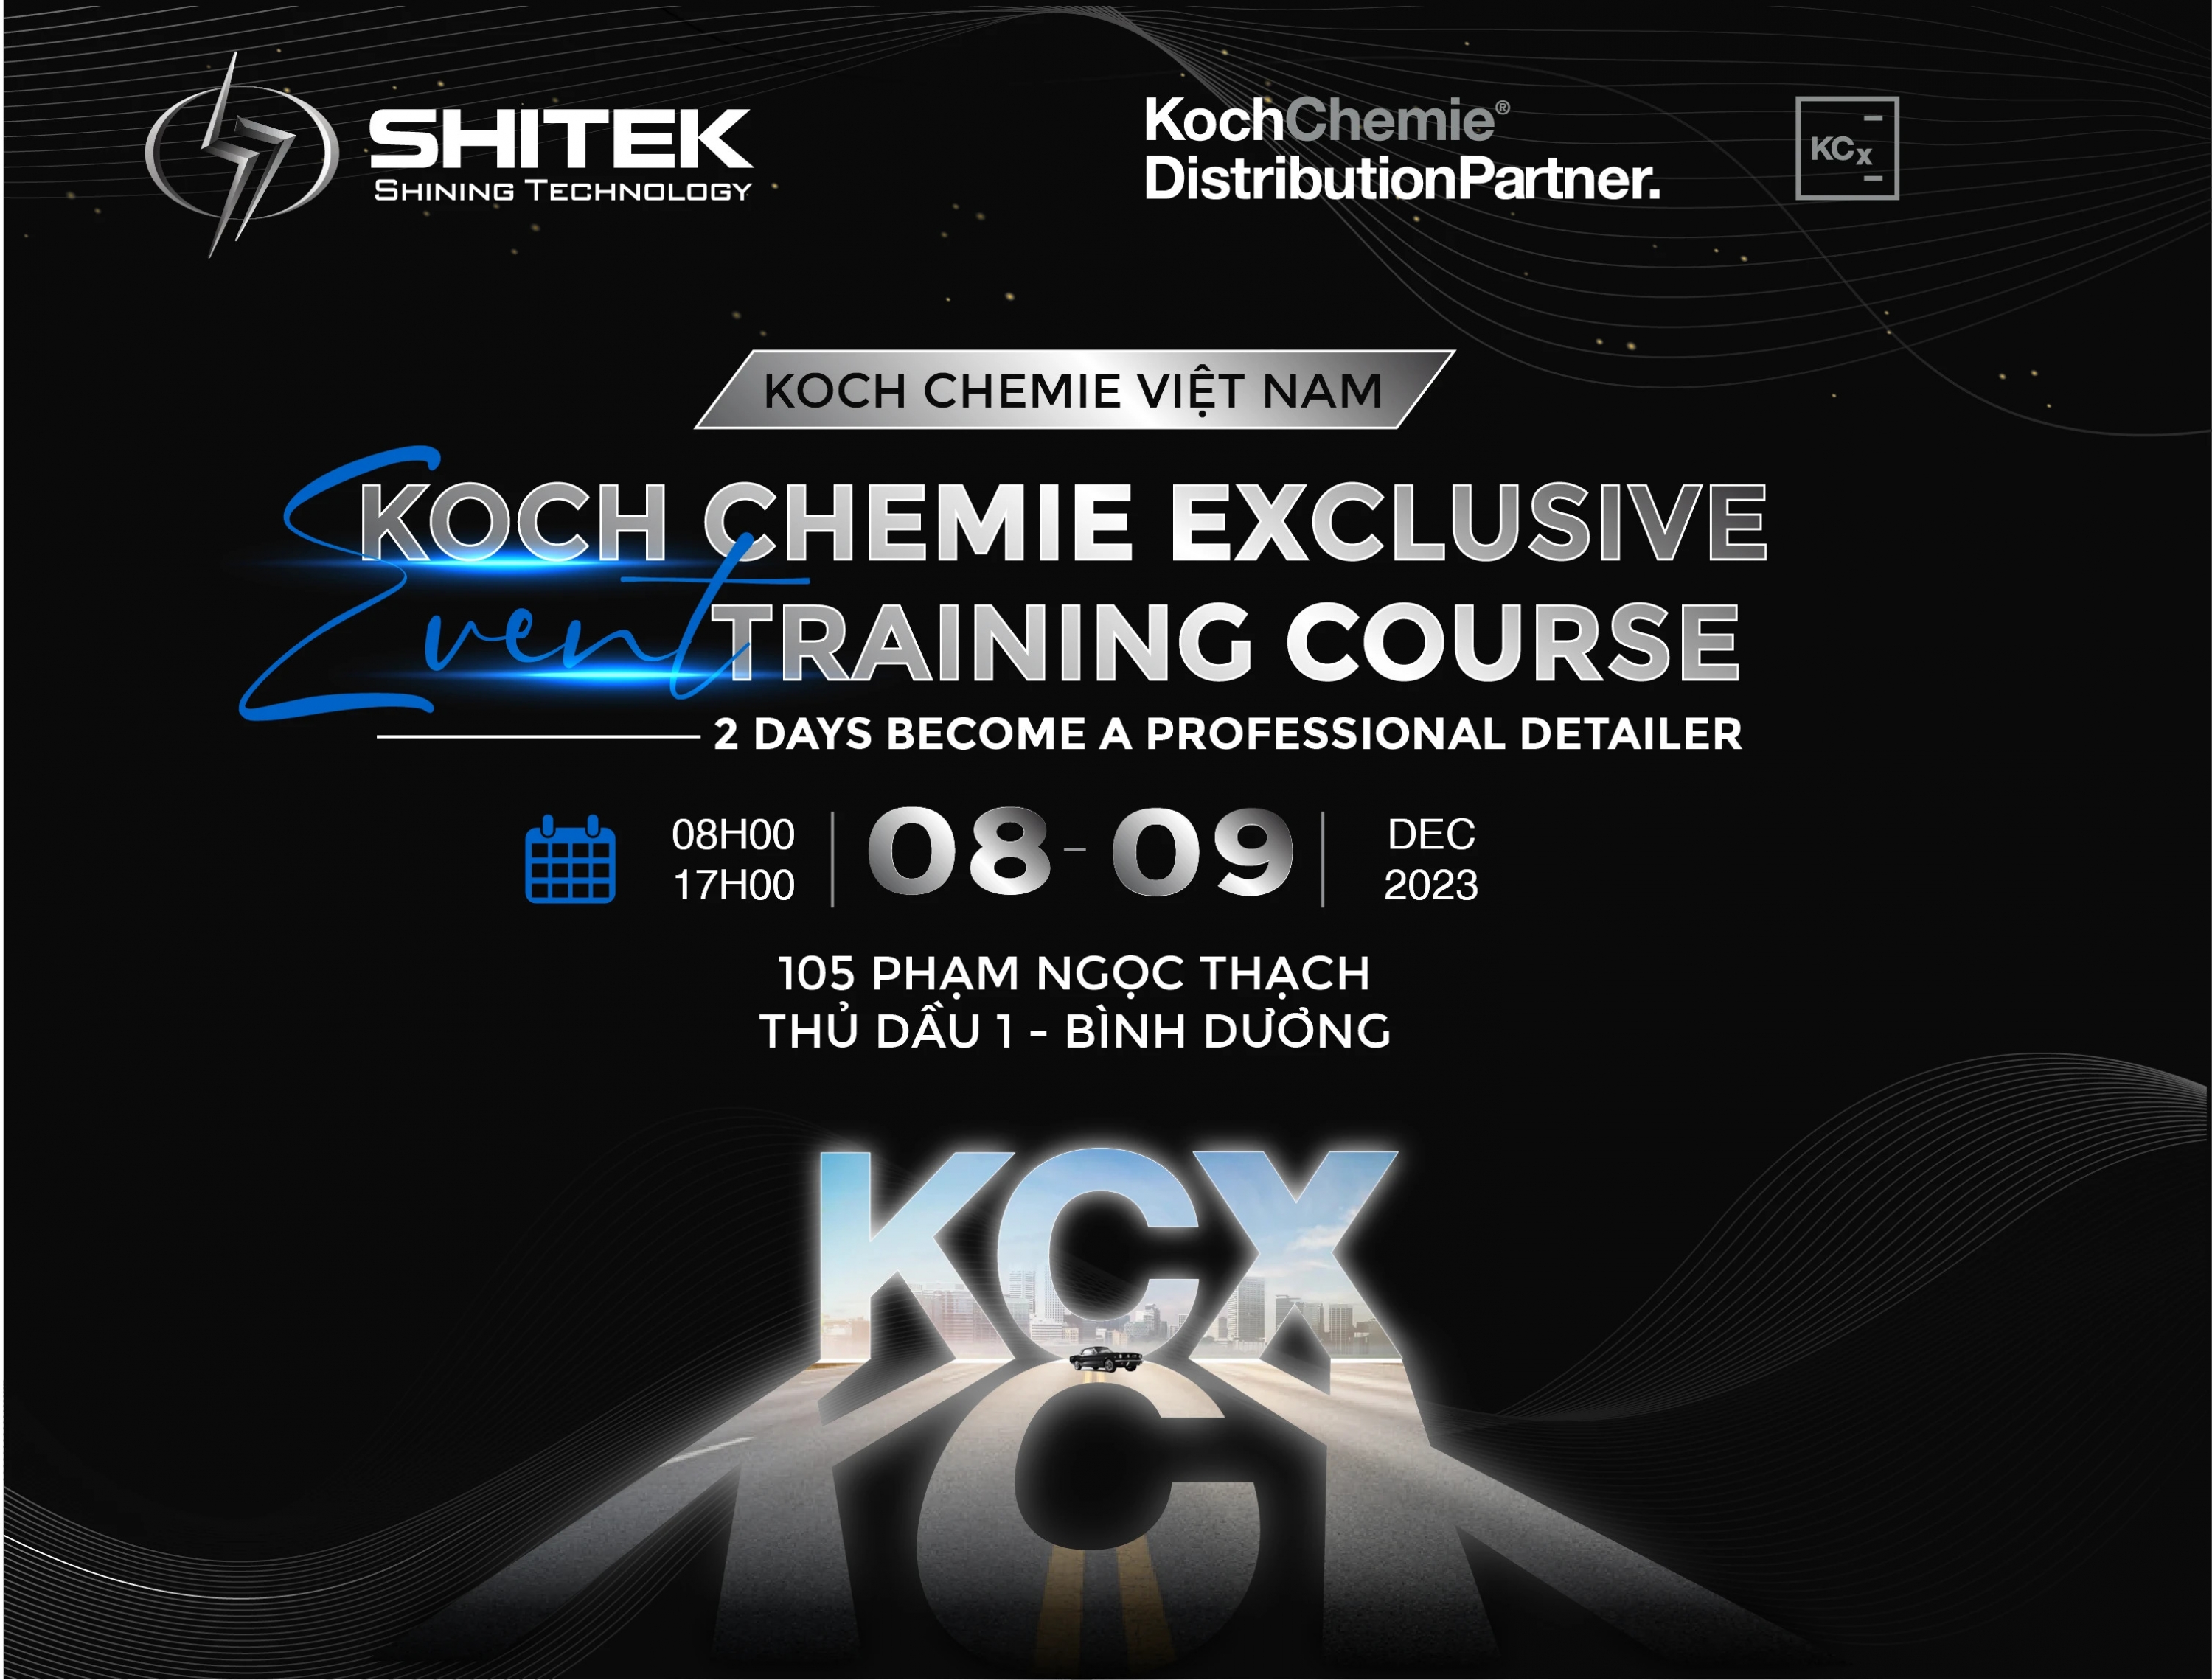 [WORKSHOP] KOCH CHEMIE EXCLUSIVE TRAINING COURSE - 2 DAYS TO BECOME A PROFESSIONAL DETAILER